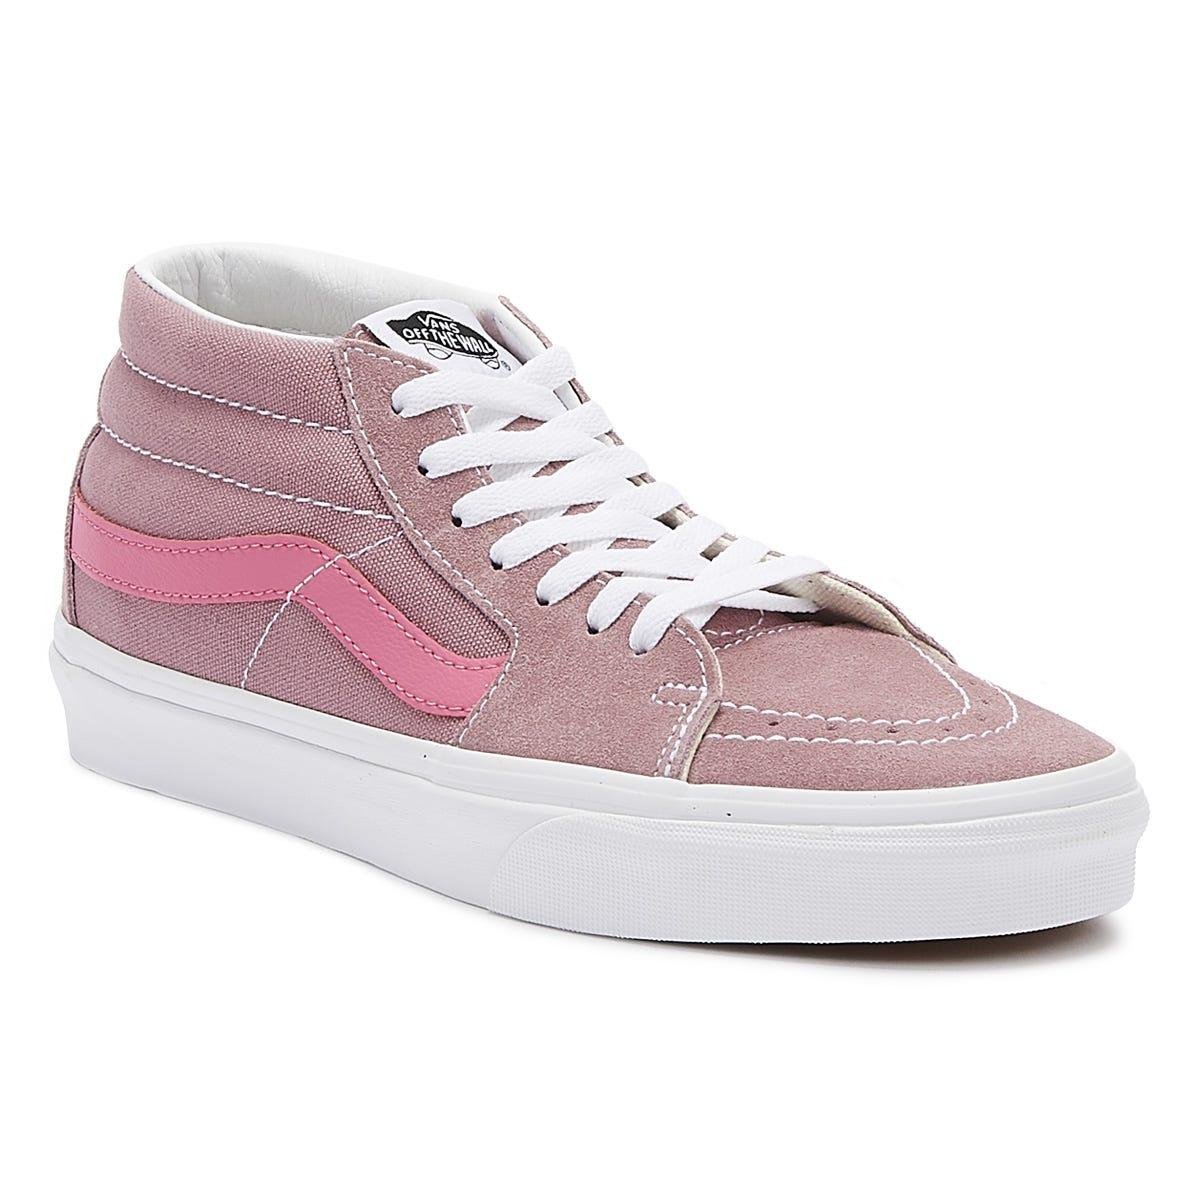 Vans Canvas Sk8-mid Retro Pink Trainers - Save 70% - Lyst